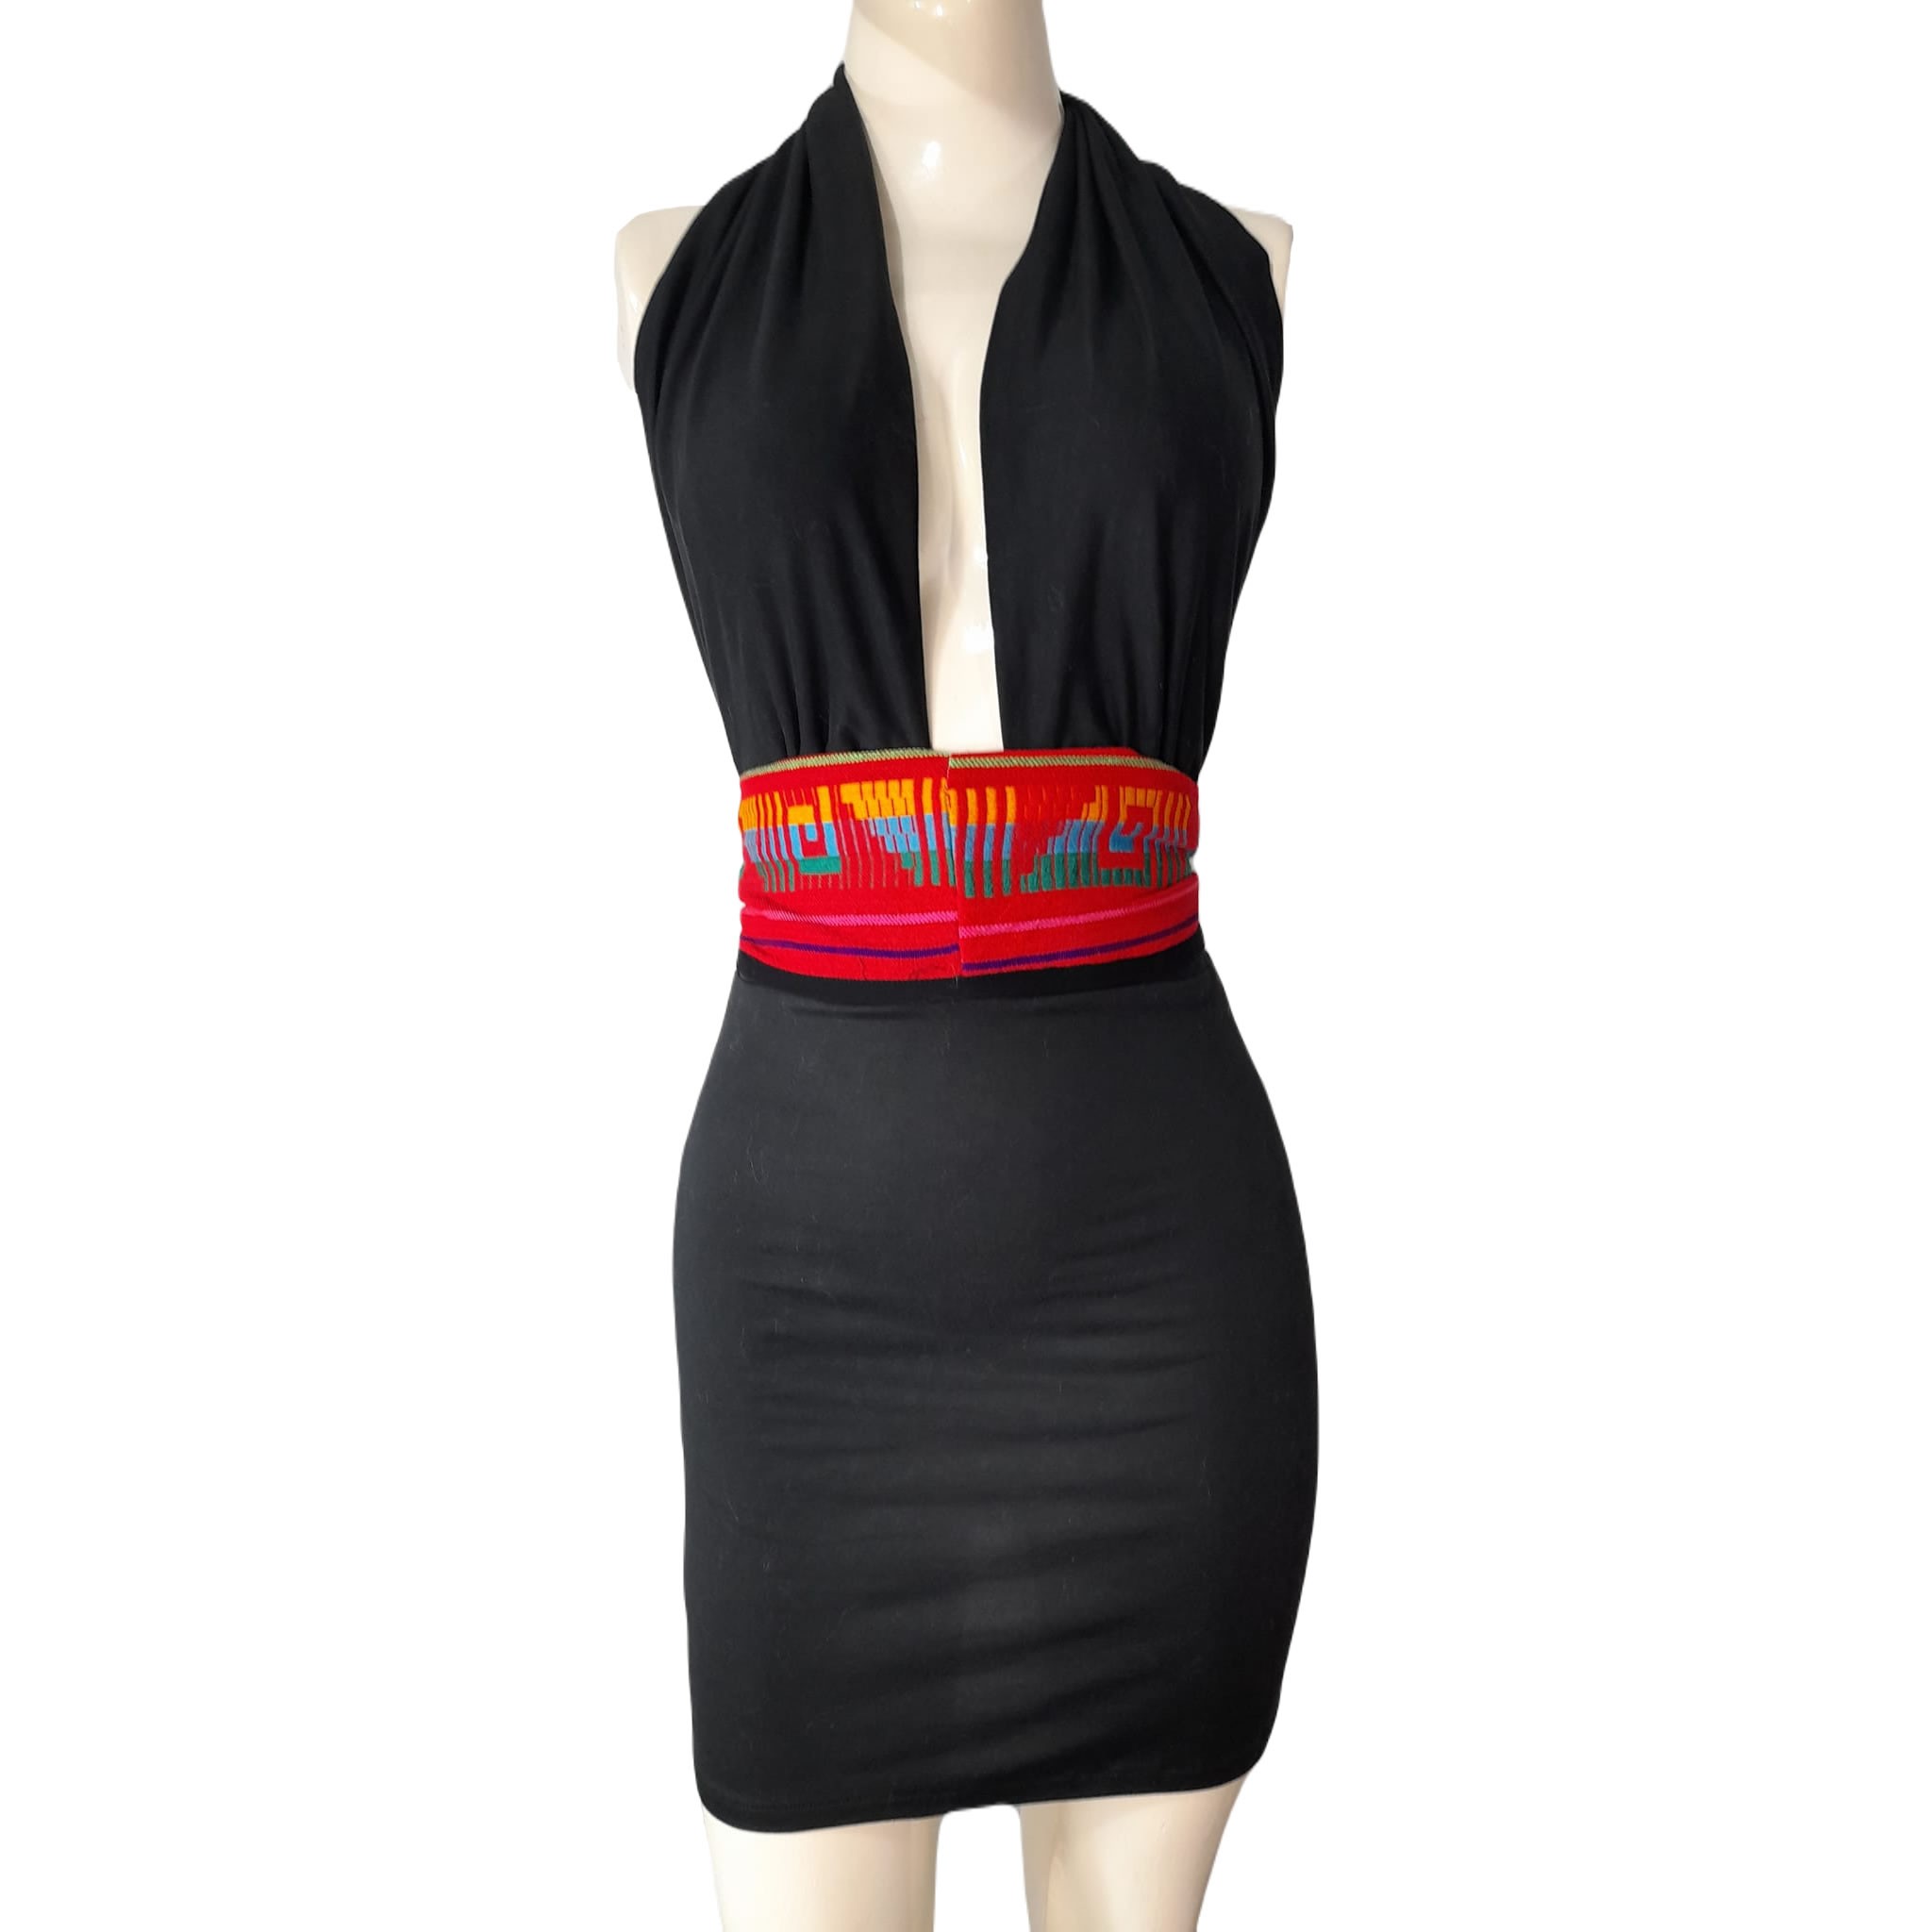 Halter Neck Dress with Mexican Belt